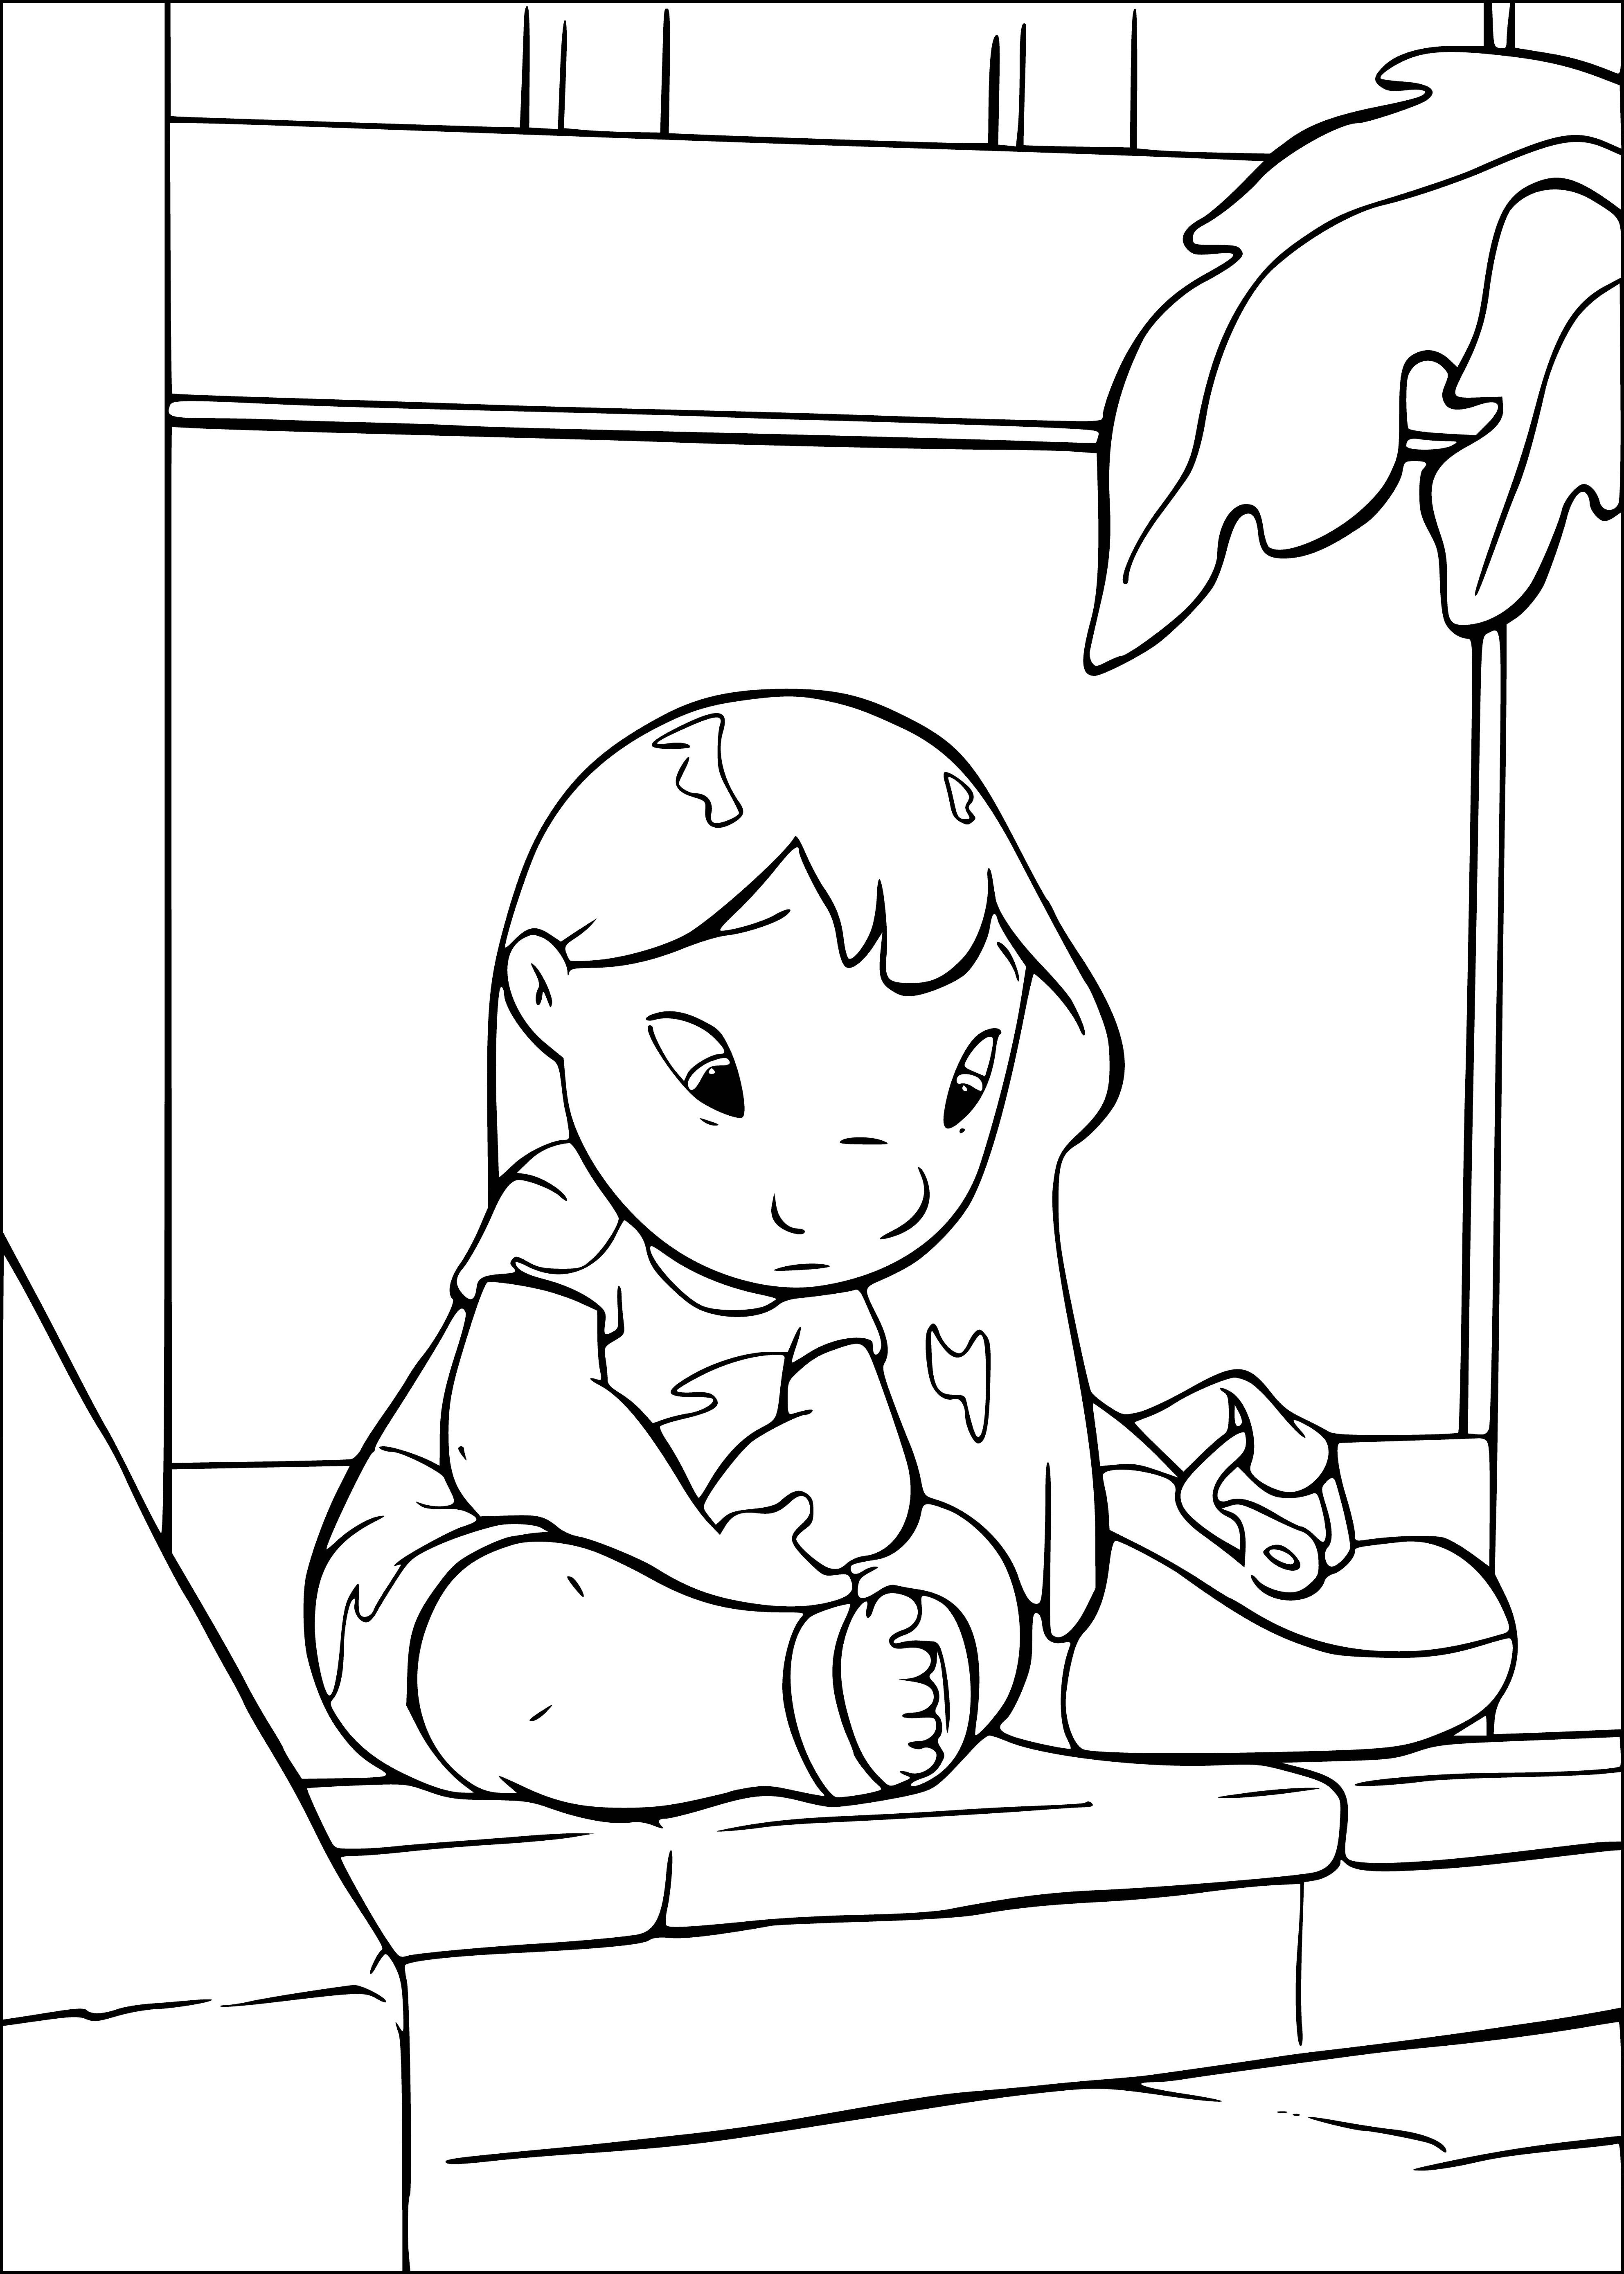 coloring page: Lilo stands with arms crossed, tapping foot impatiently- waiting for something.